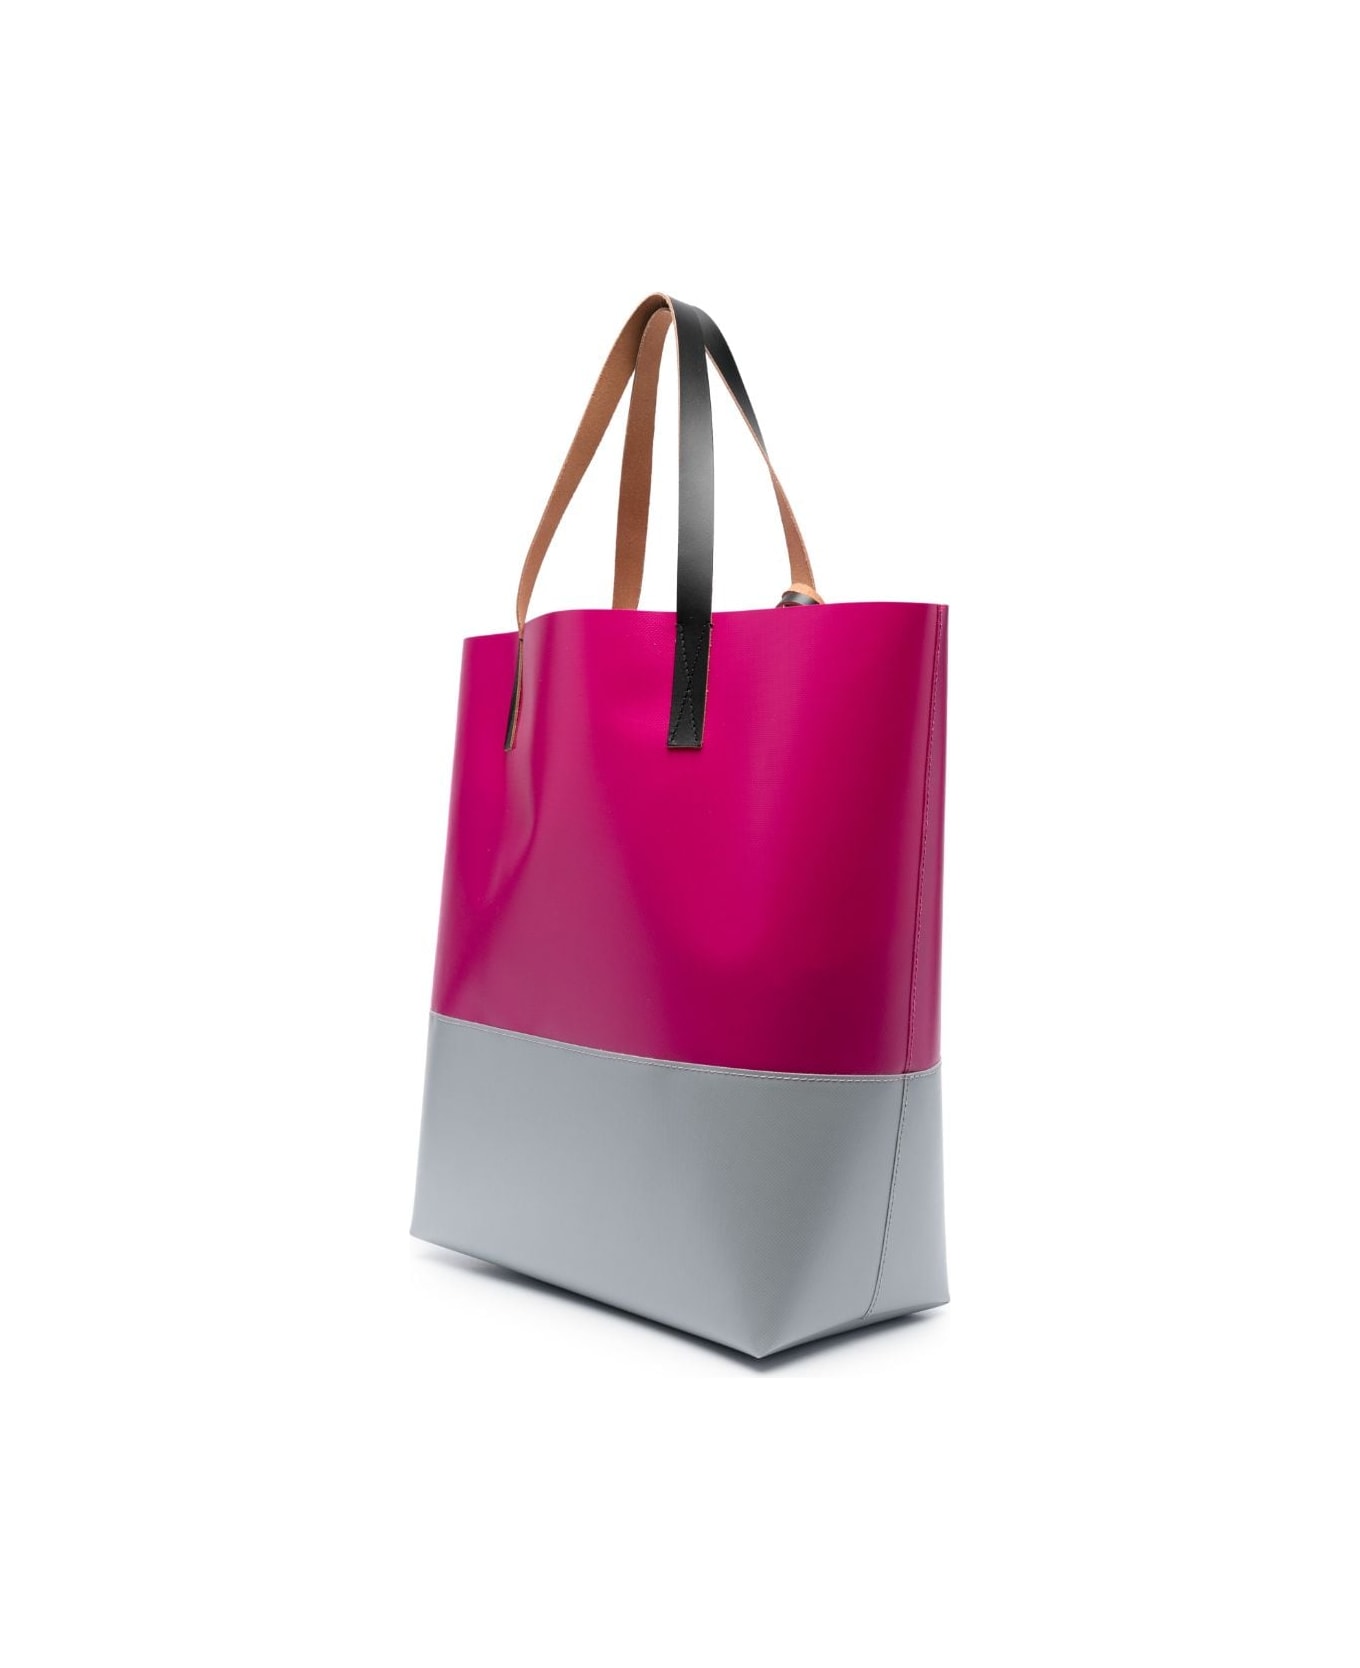 Marni North South Open Tote Bag In Color-blocked With Printed Logo - Cassis Antique Silver Black